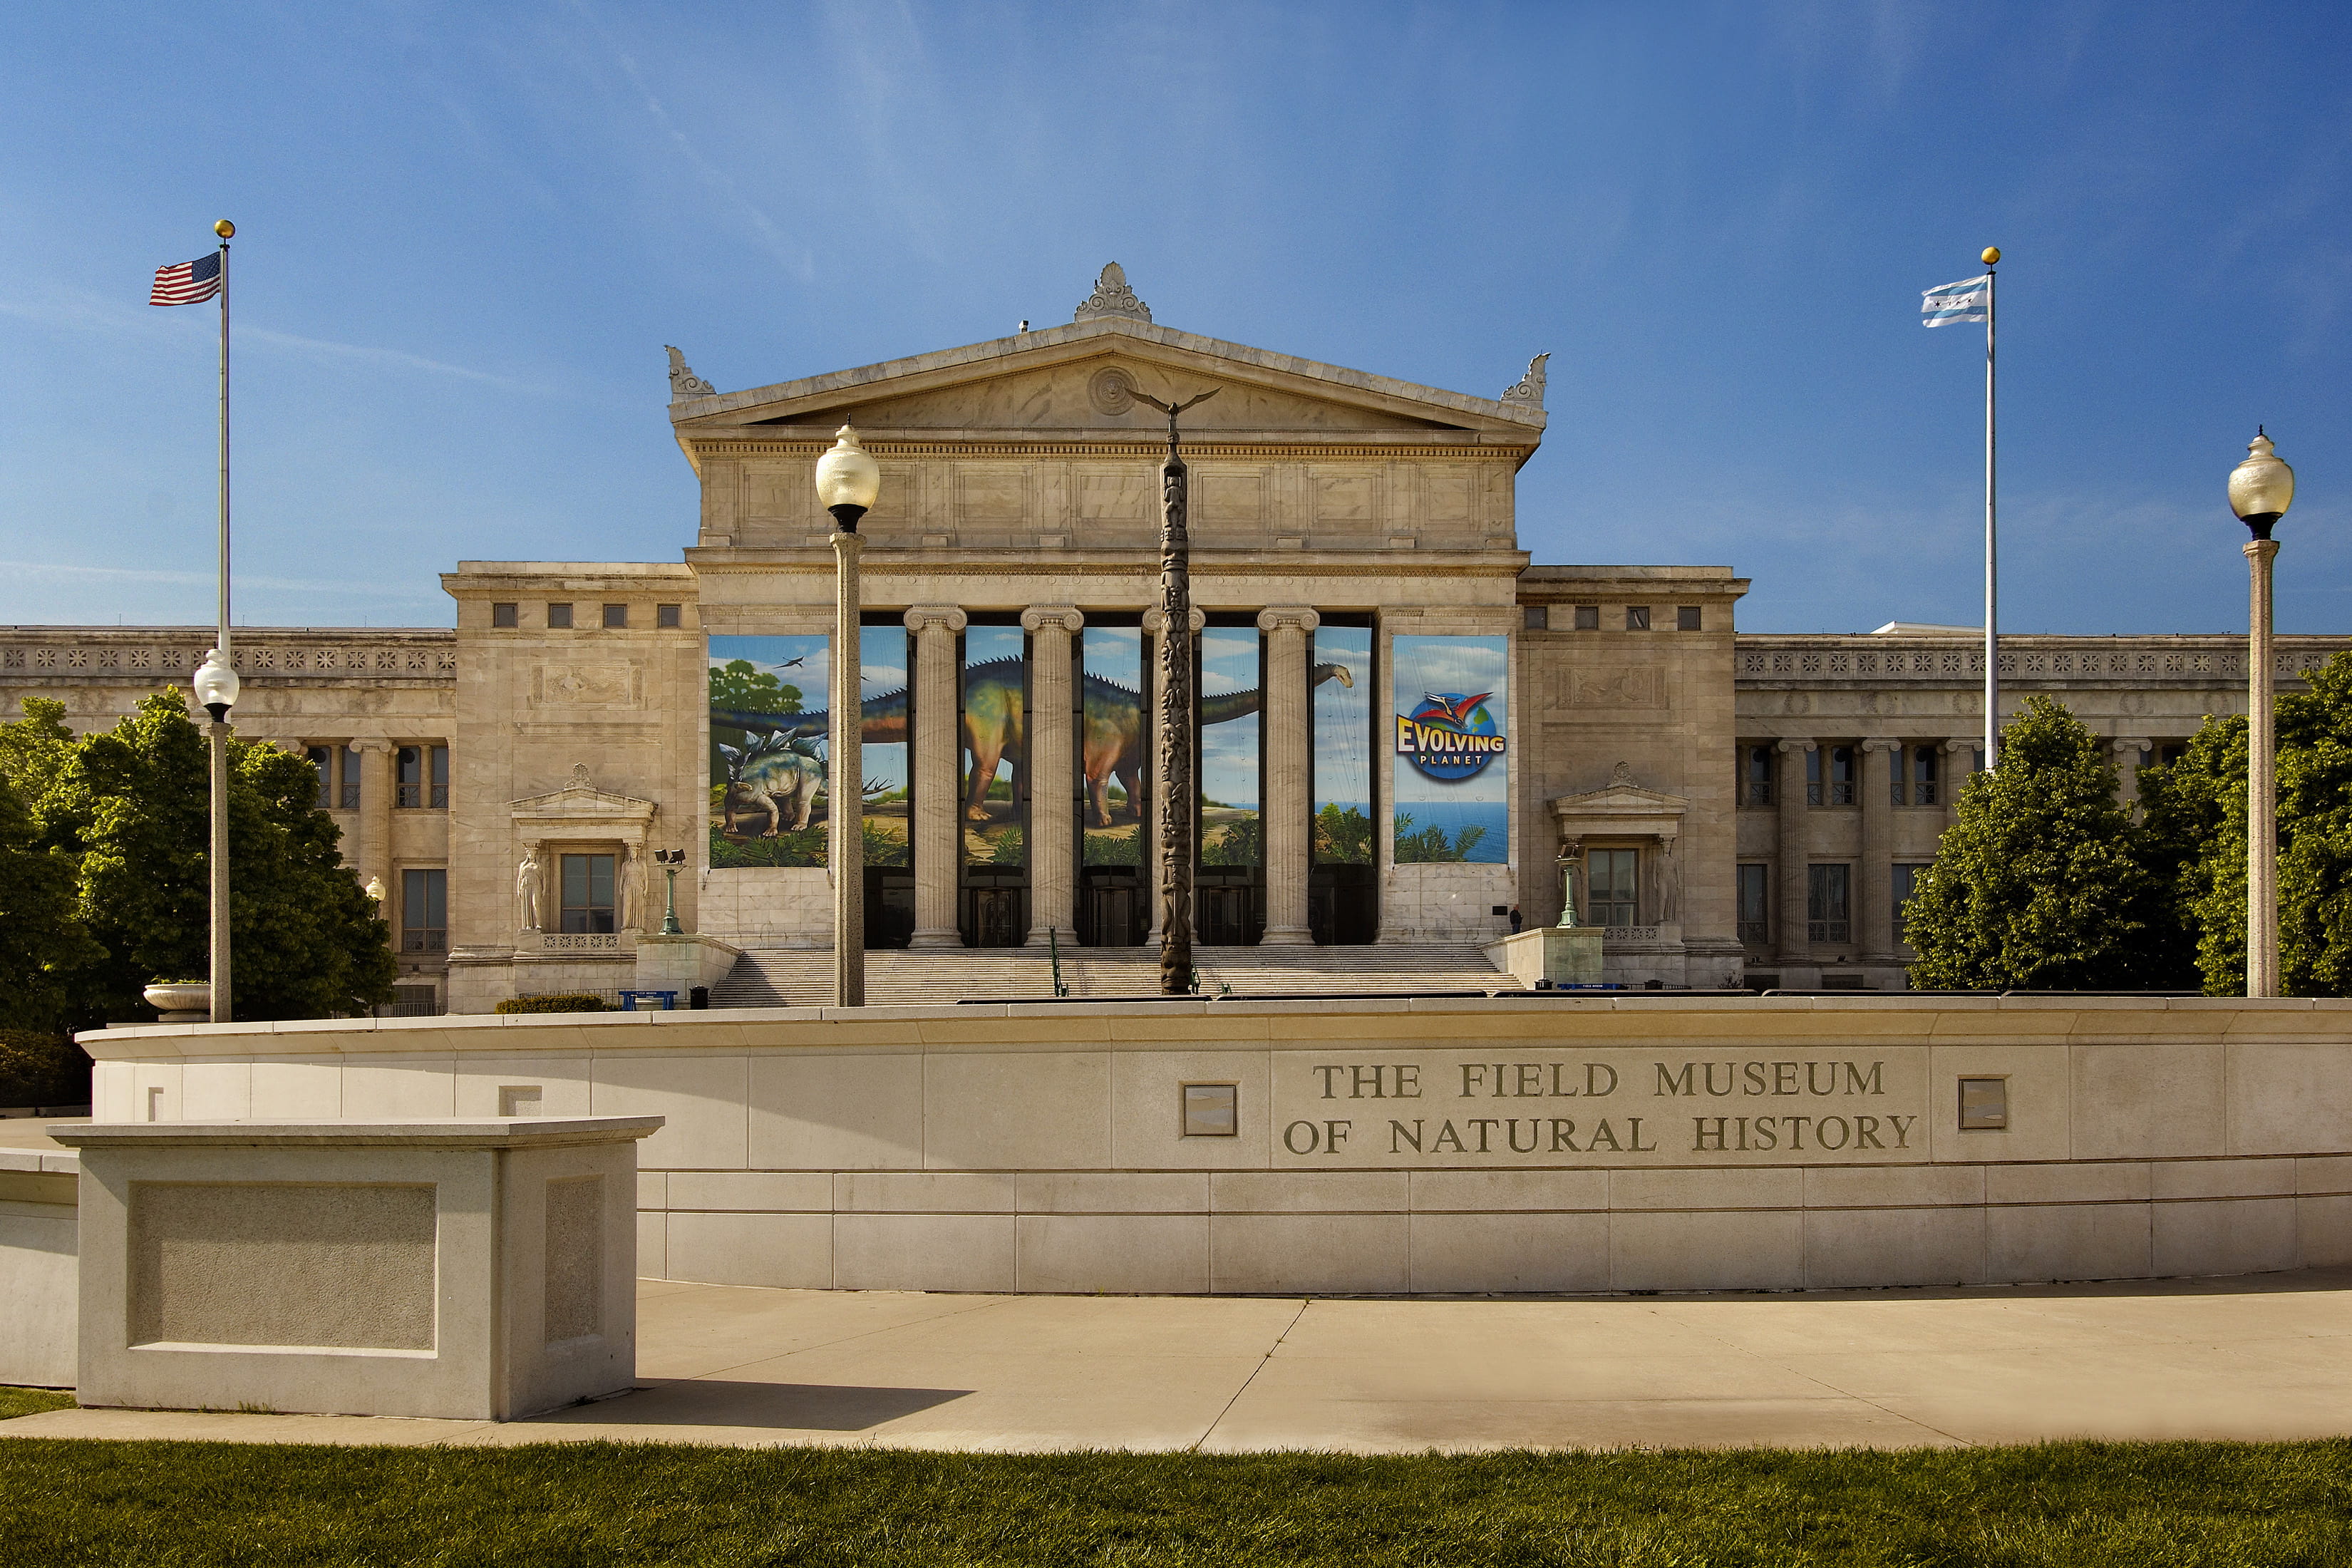 Chicago's Field Museum